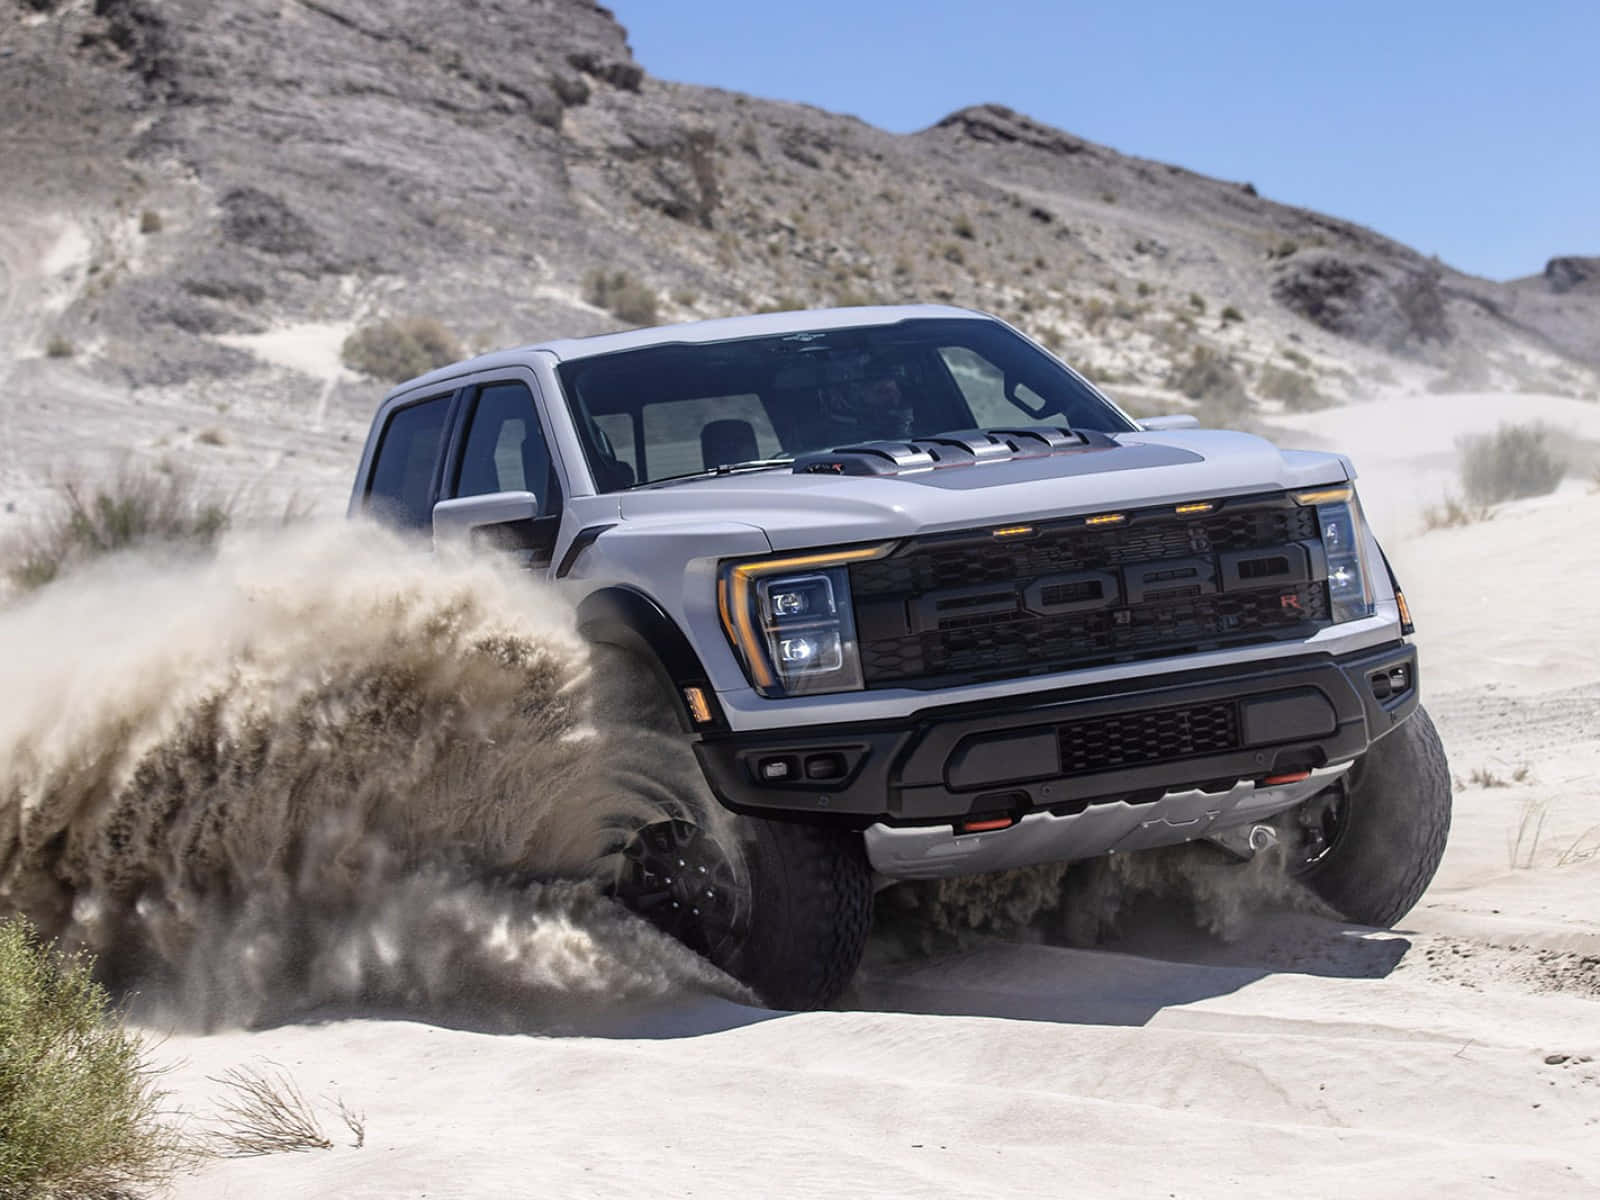 Power and Performance - The Ford F150 Wallpaper